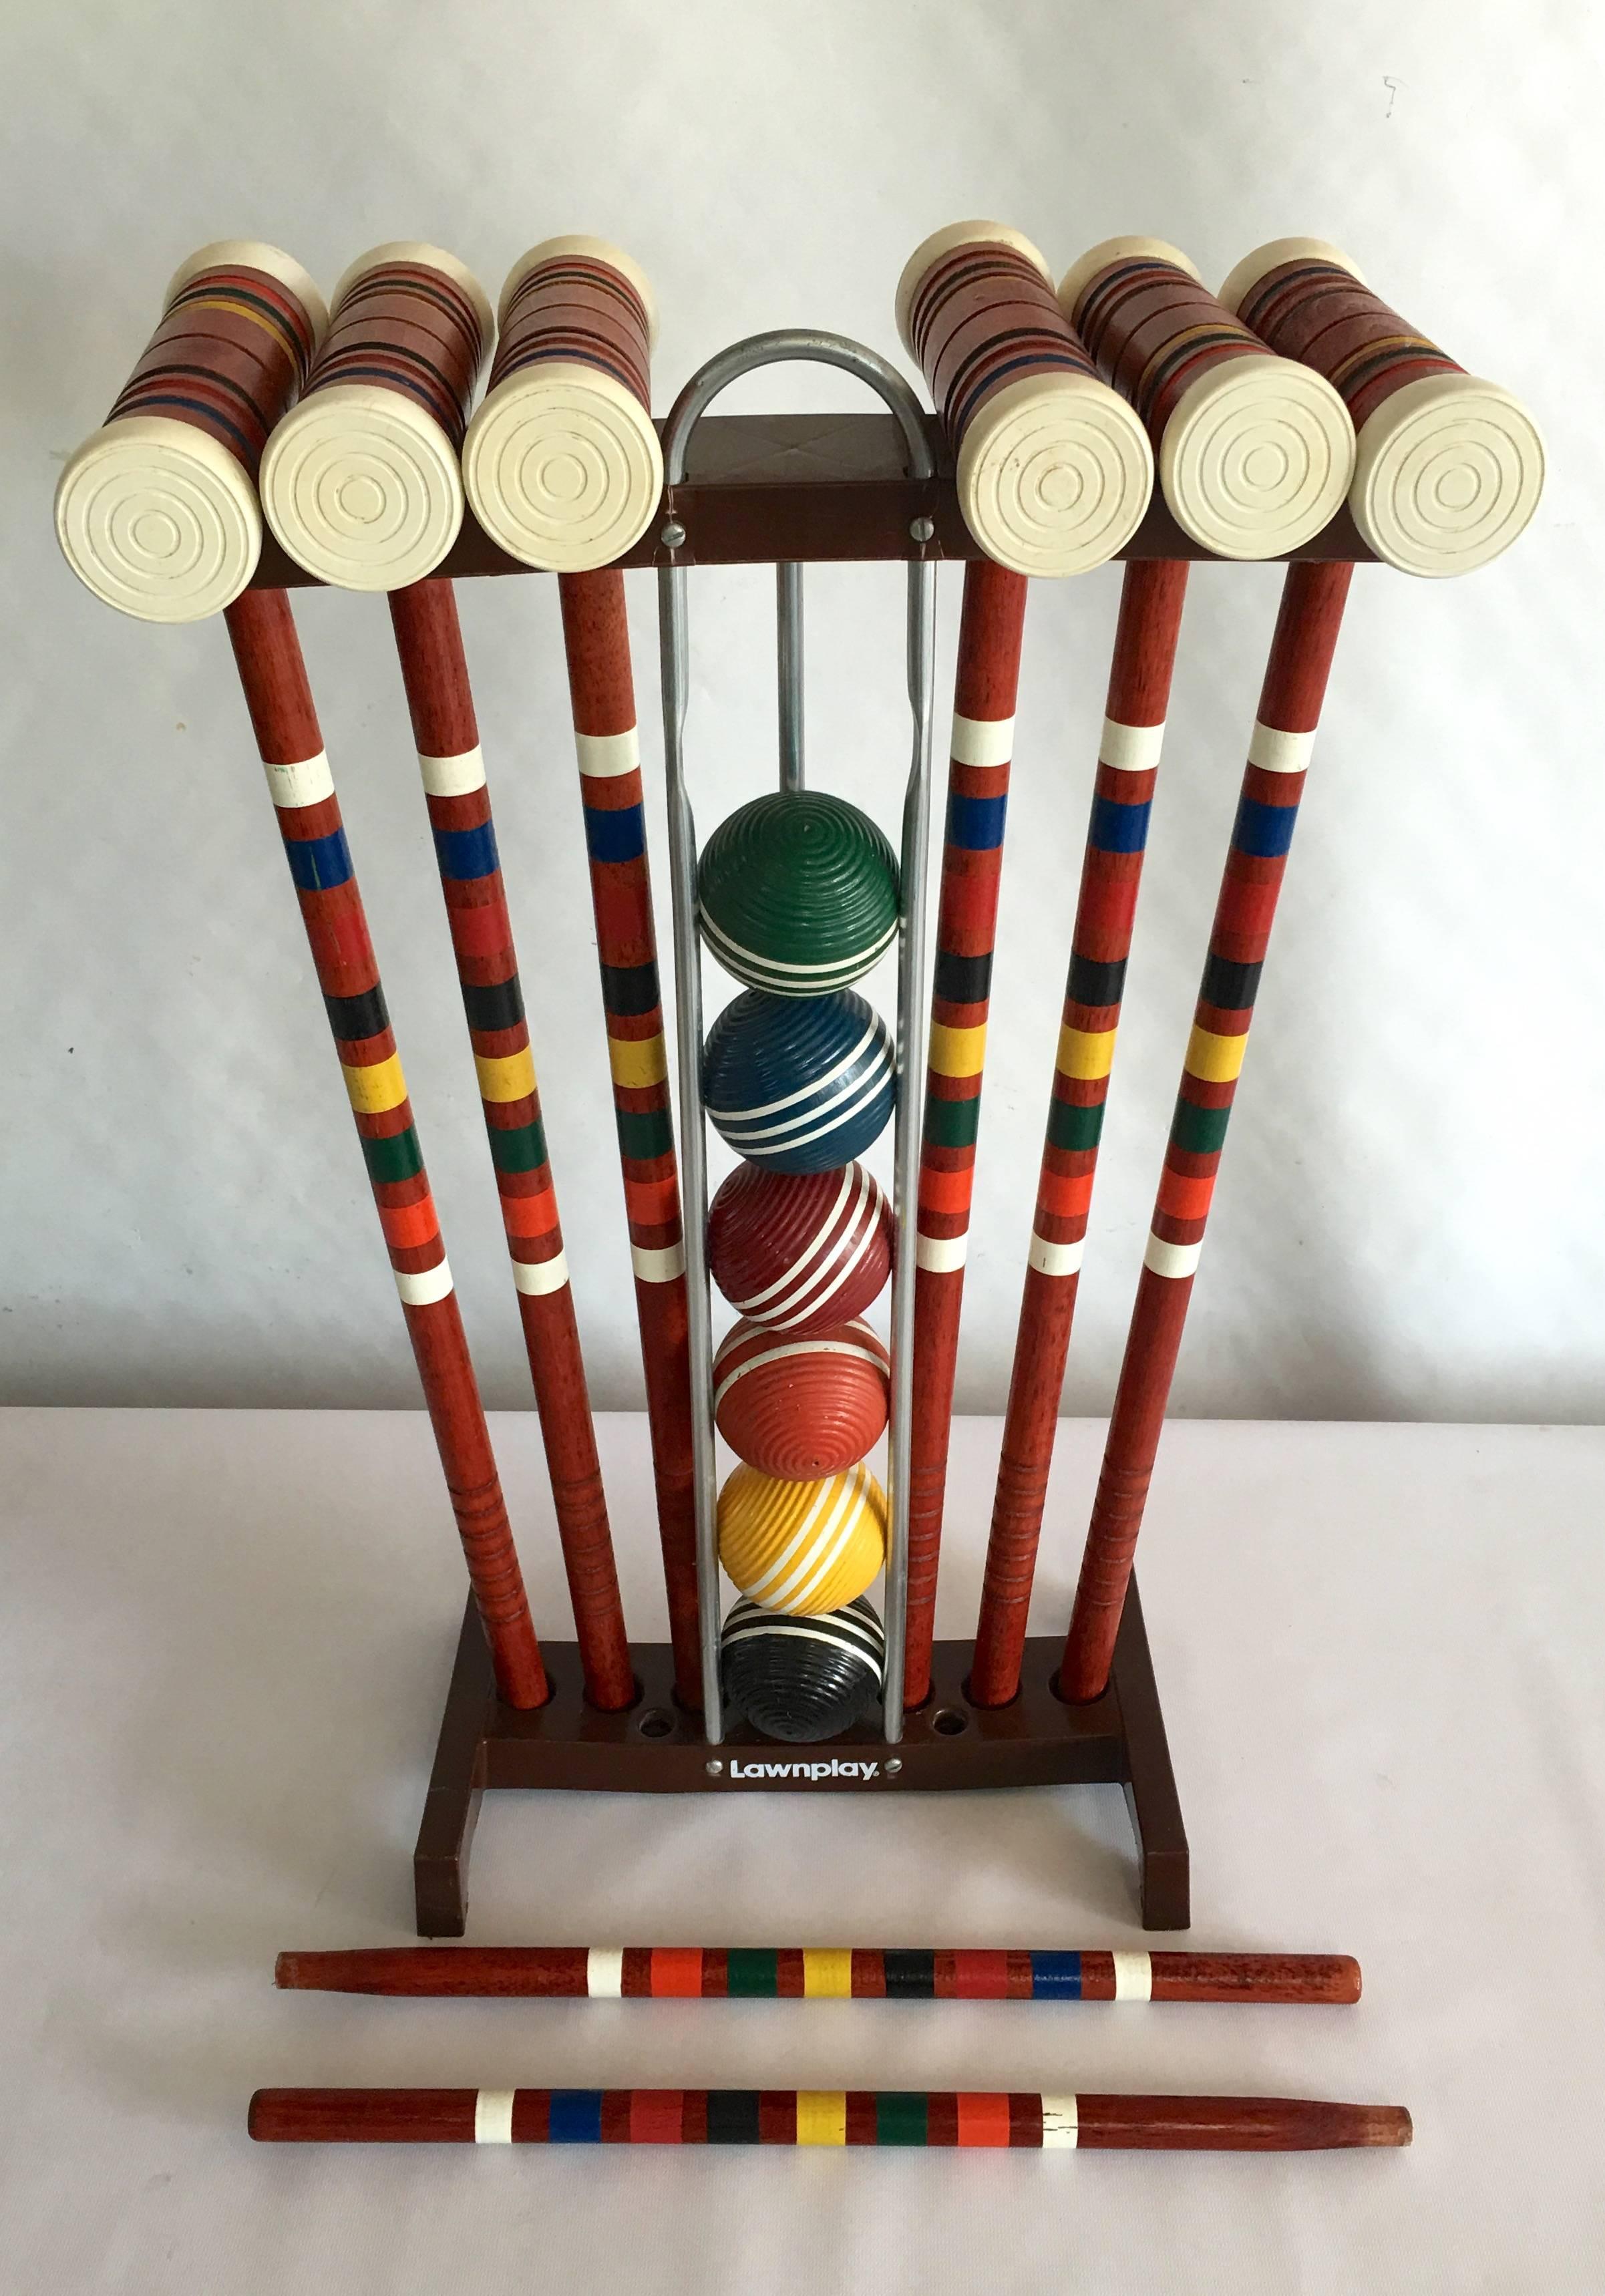 Vintage lawnplay six-player complete 24-piece croquet set. Set includes, six wood mallets, six painted wood balls, two wood marker sticks, nine vinyl coated wire wickets, and stand.